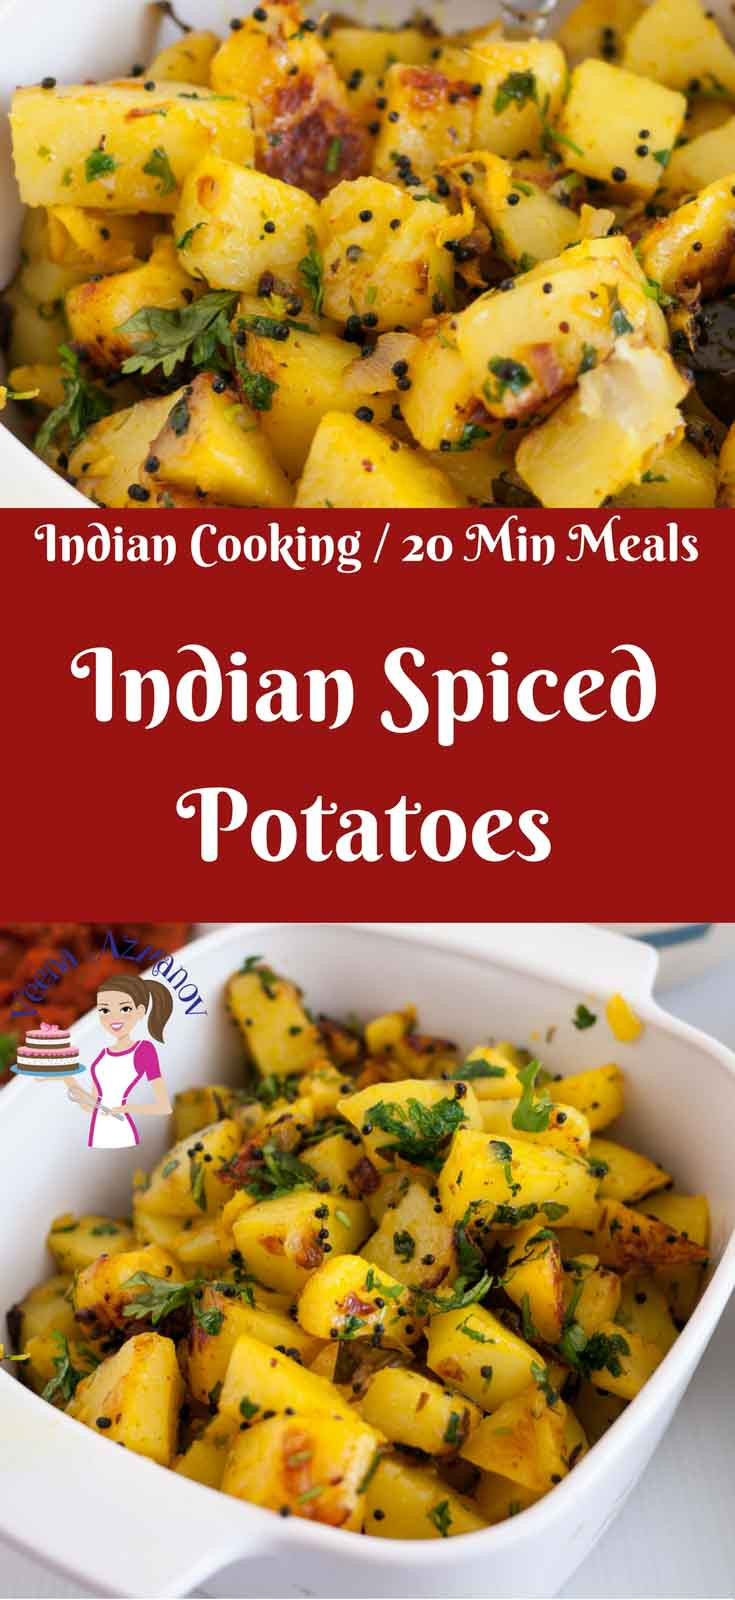 Potatoes Indian Recipes
 Quick Indian Spiced Potatoes in JUST 20 minutes Veena